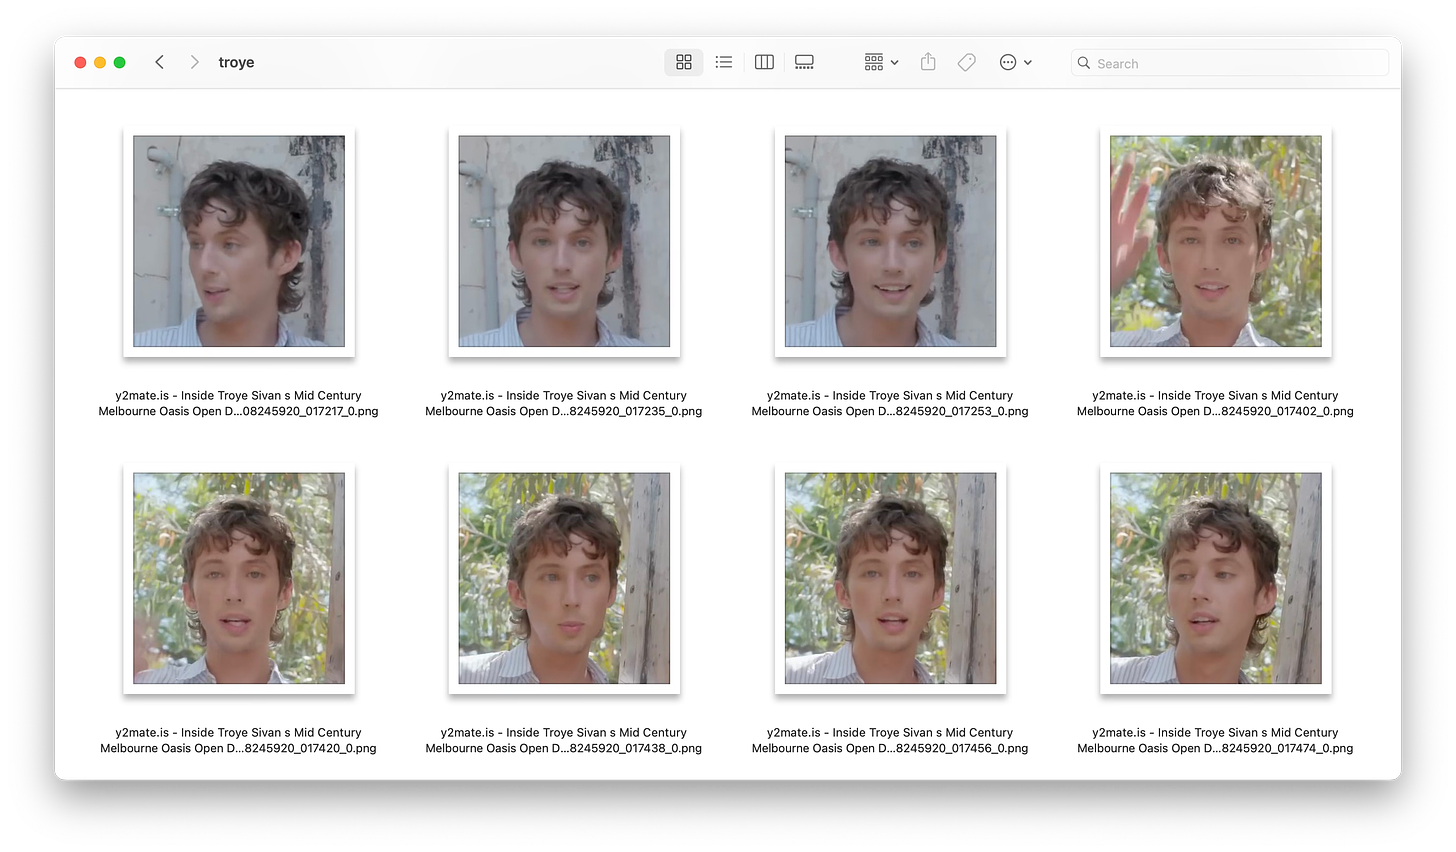 A Finder window on a Mac showing a grid of eight thumbnail images from 'Inside Troye Sivan's Mid Century Melbourne Oasis.' Each image captures a young man with short, curly hair in varied expressions, wearing a light-colored shirt against a blurred natural background. The filenames indicate they are part of a sequence, and the Mac interface elements like the red, yellow, and green window control buttons are visible at the top.